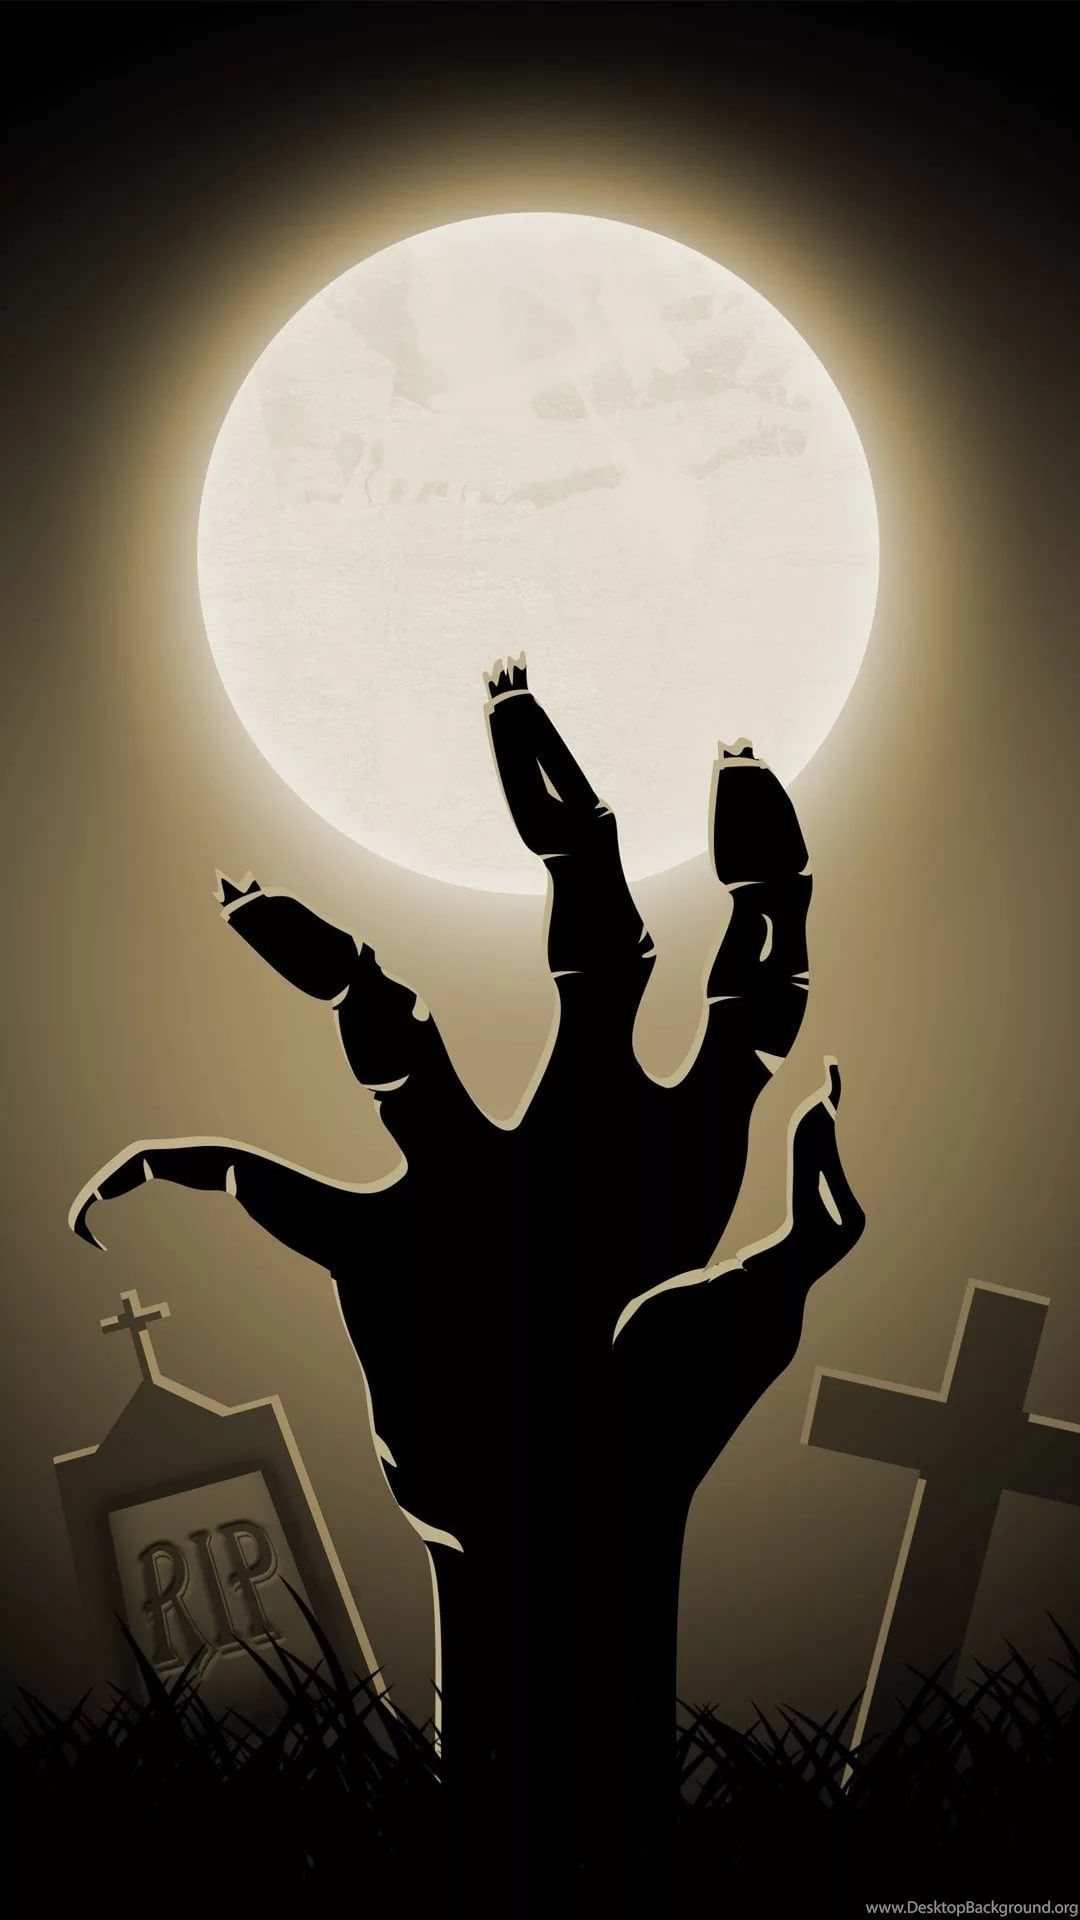 Zombie wallpaper for my phone